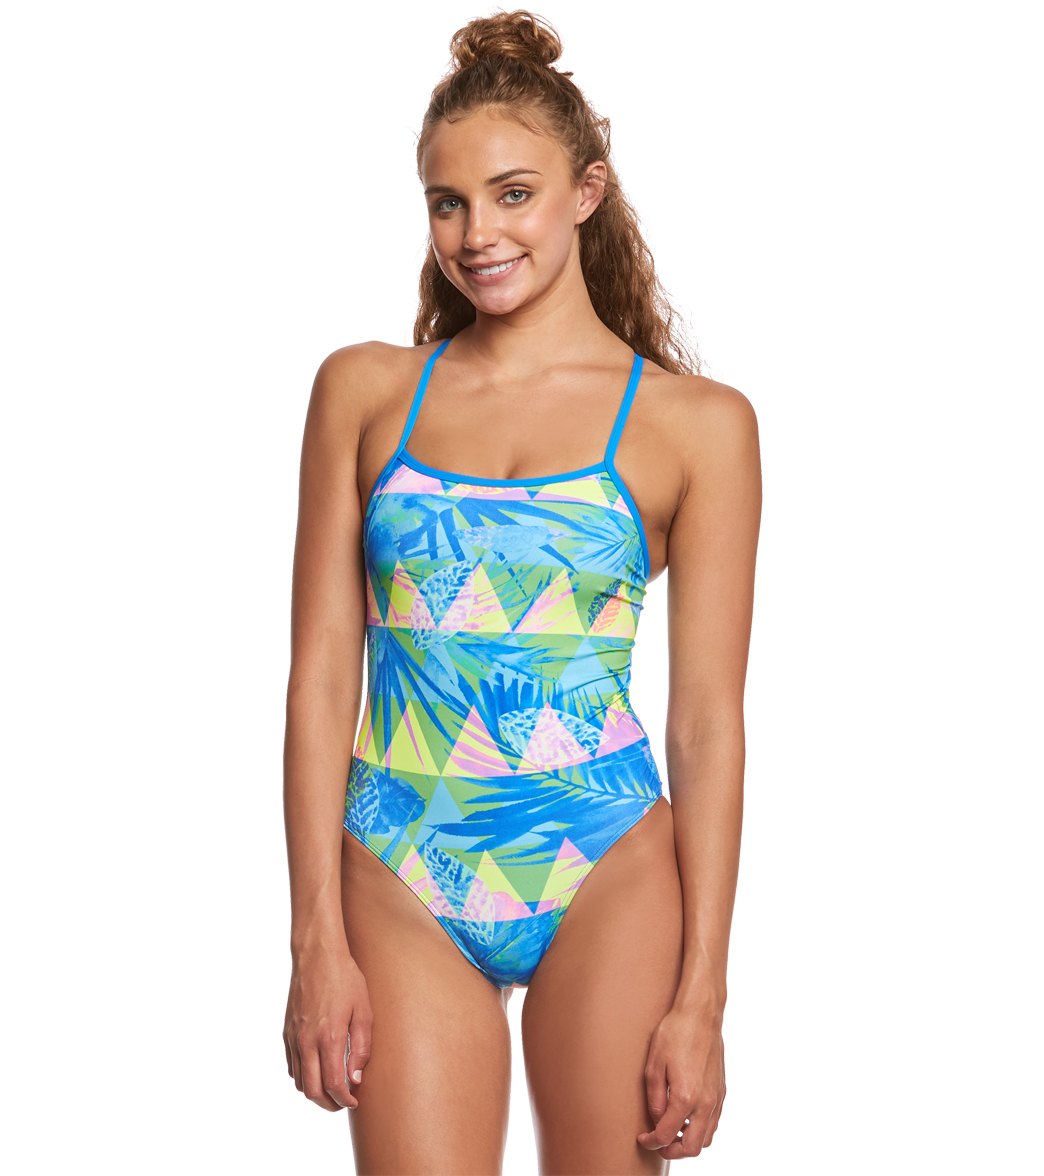 Amanzi Women's Sunkissed One Piece Swimsuit - Multi 34 Polyester - Swimoutlet.com